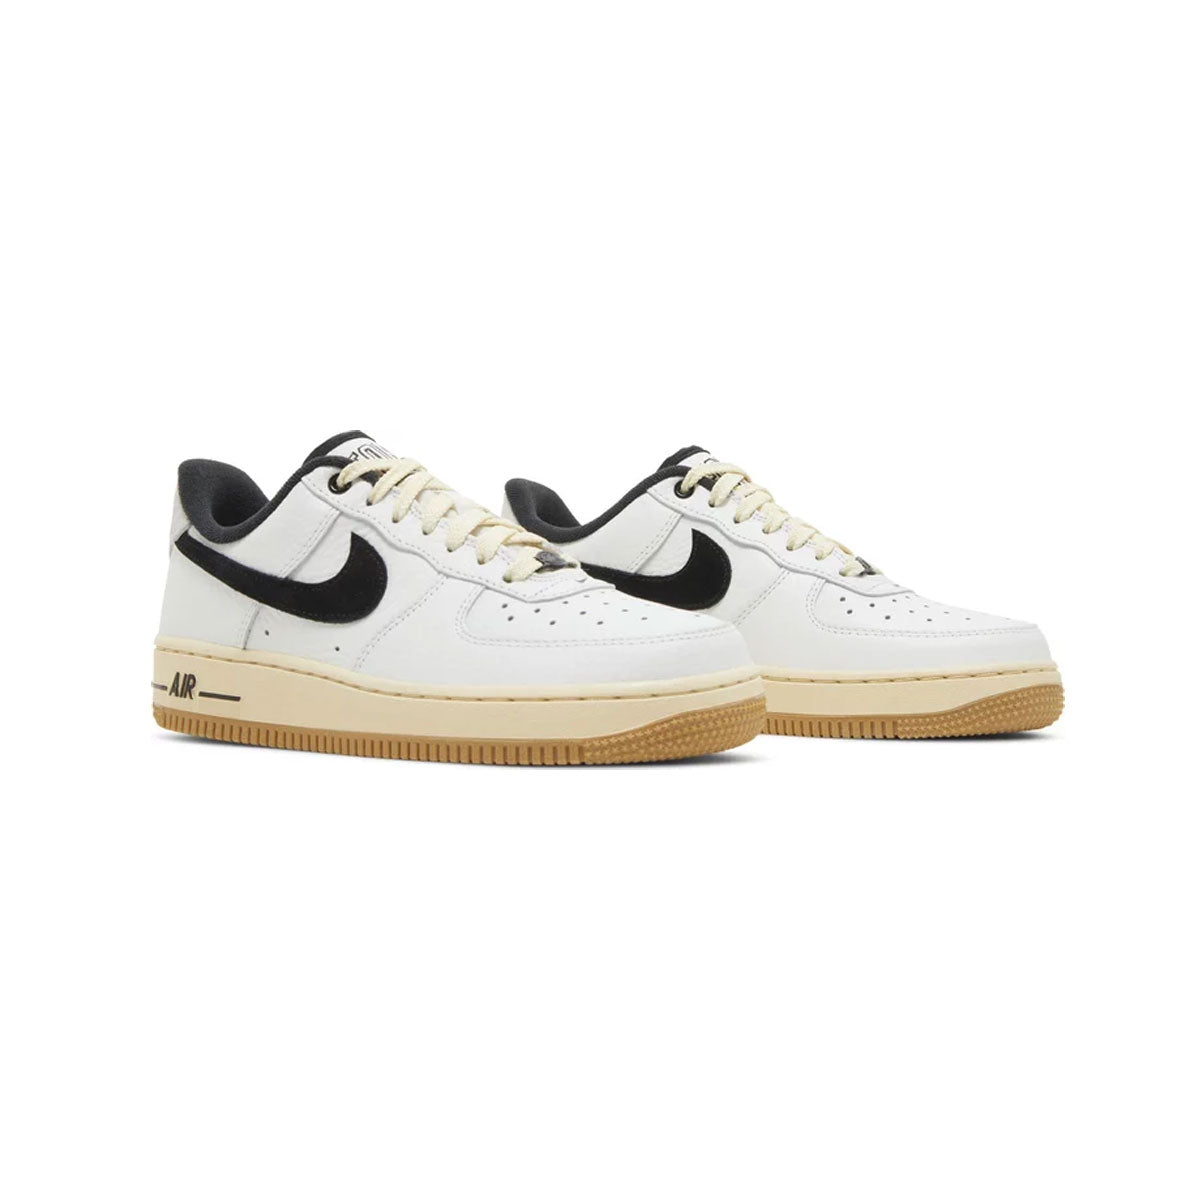 Nike Women's Air Force 1 '07 LX Low Command Force